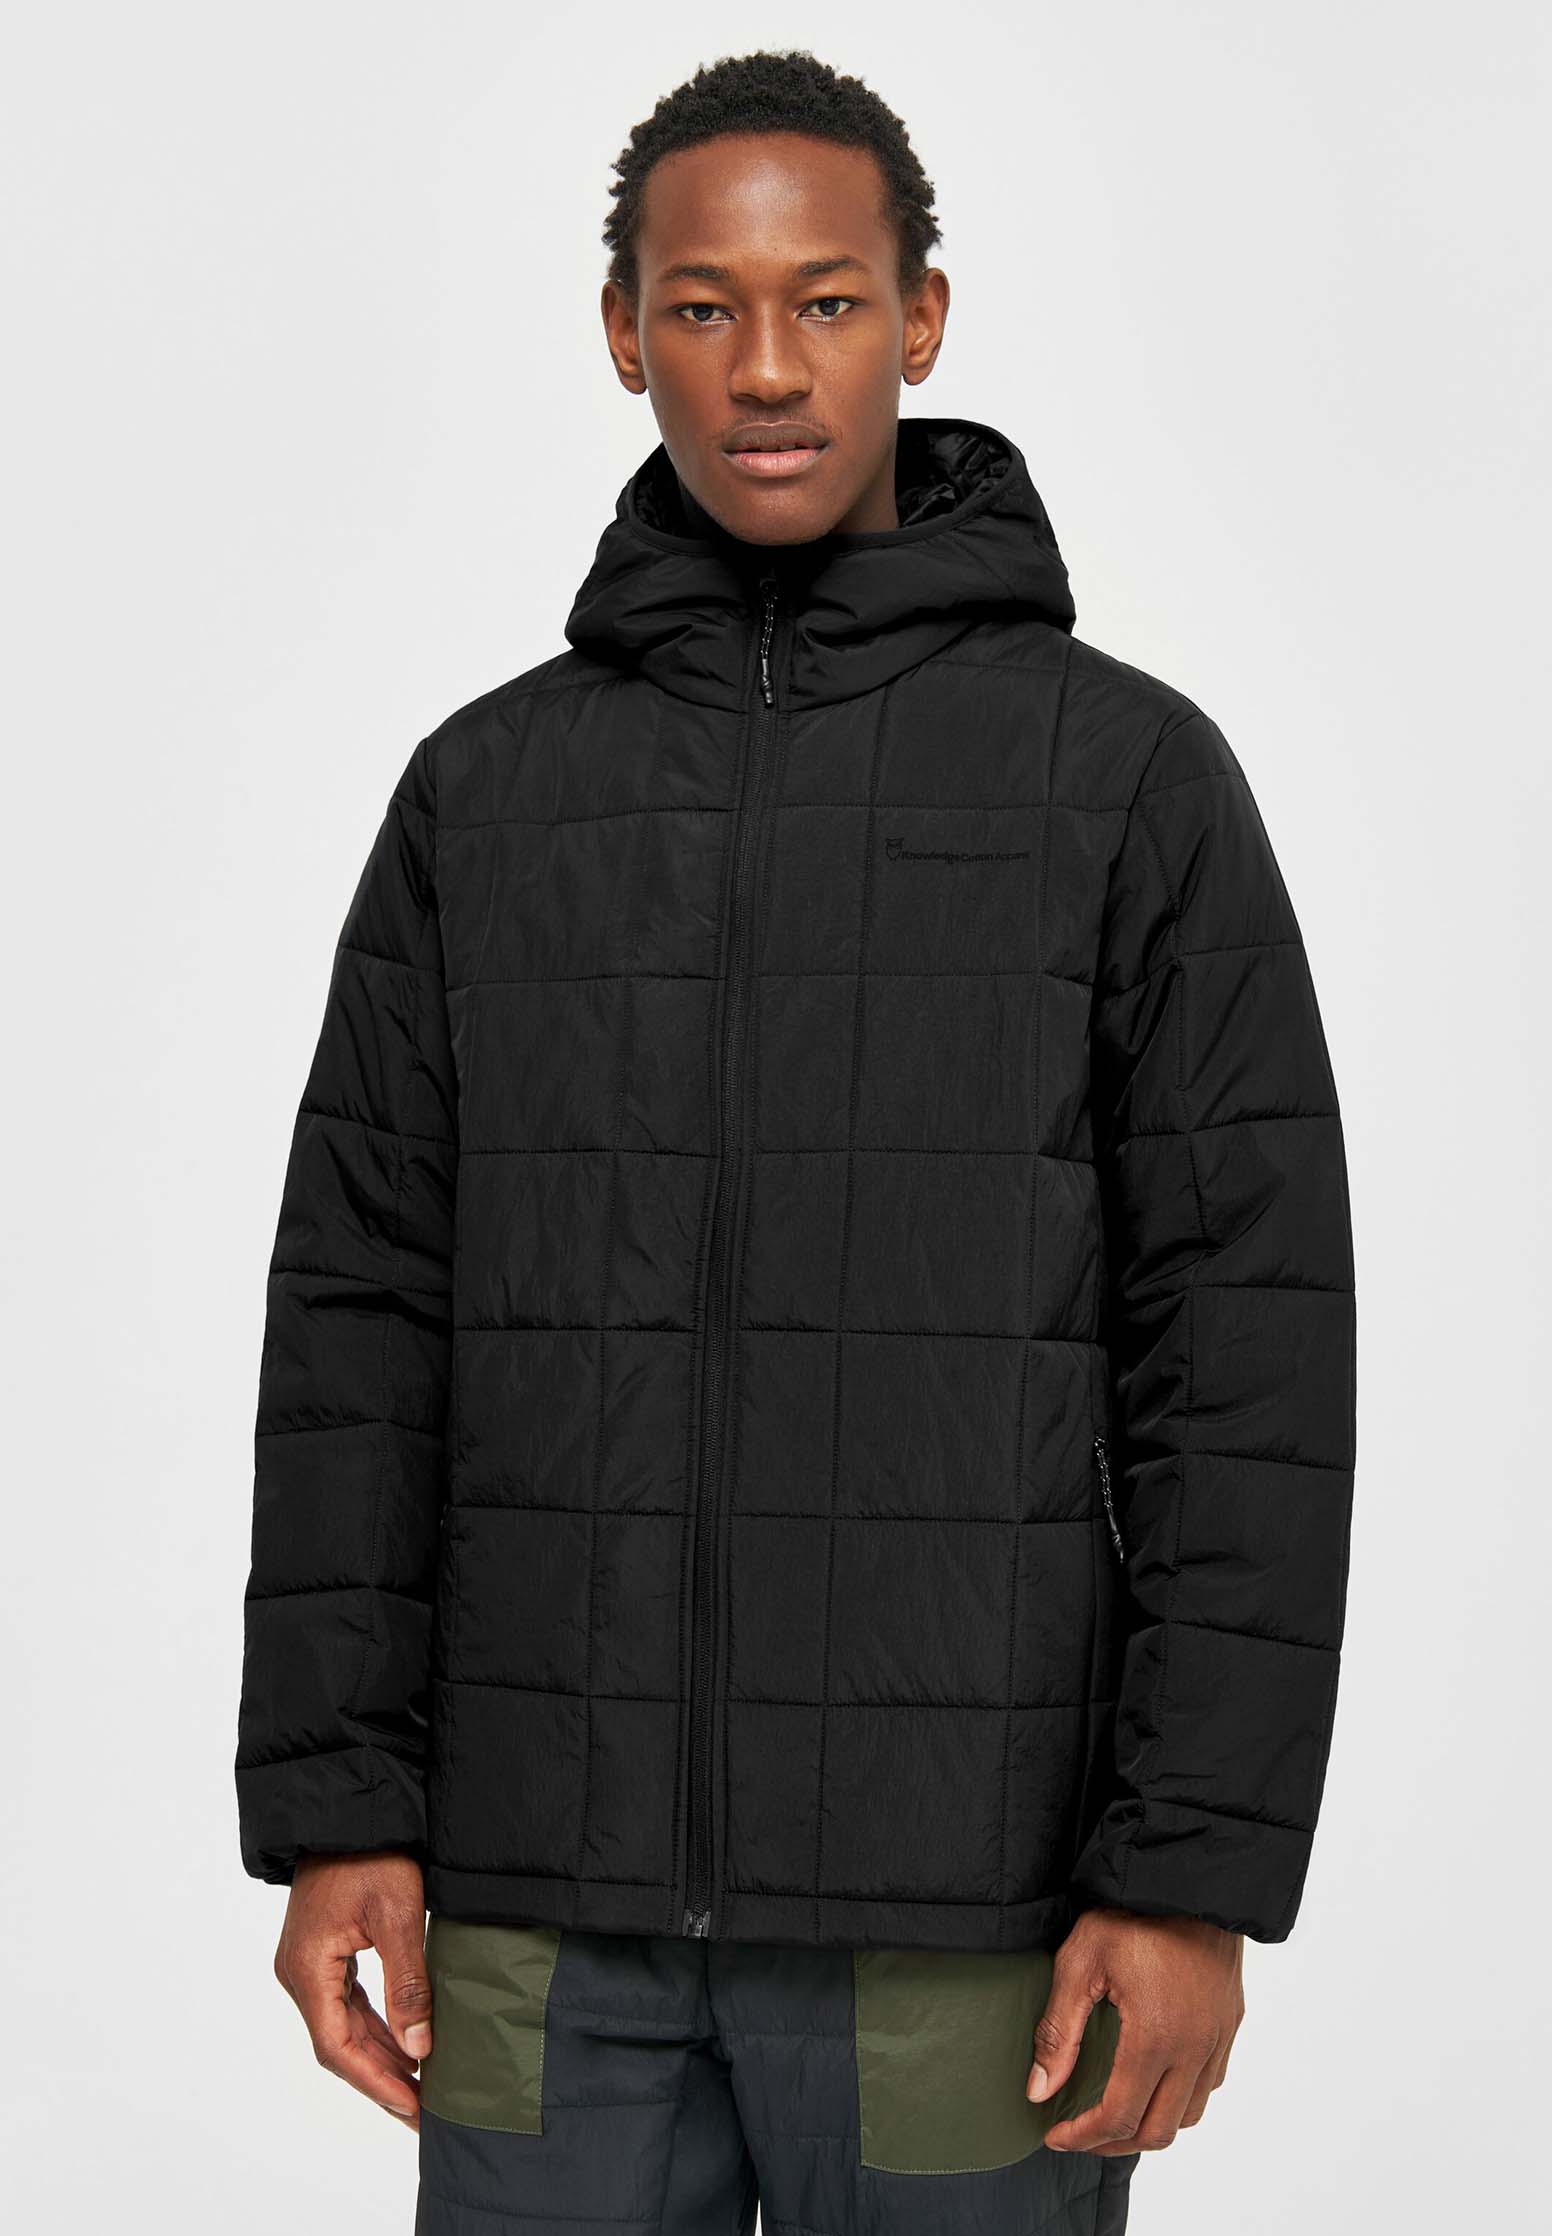 KNOWLEDGECOTTON APPAREL GO ANYWEAR™ Quilted Padded Jacket black jet XL